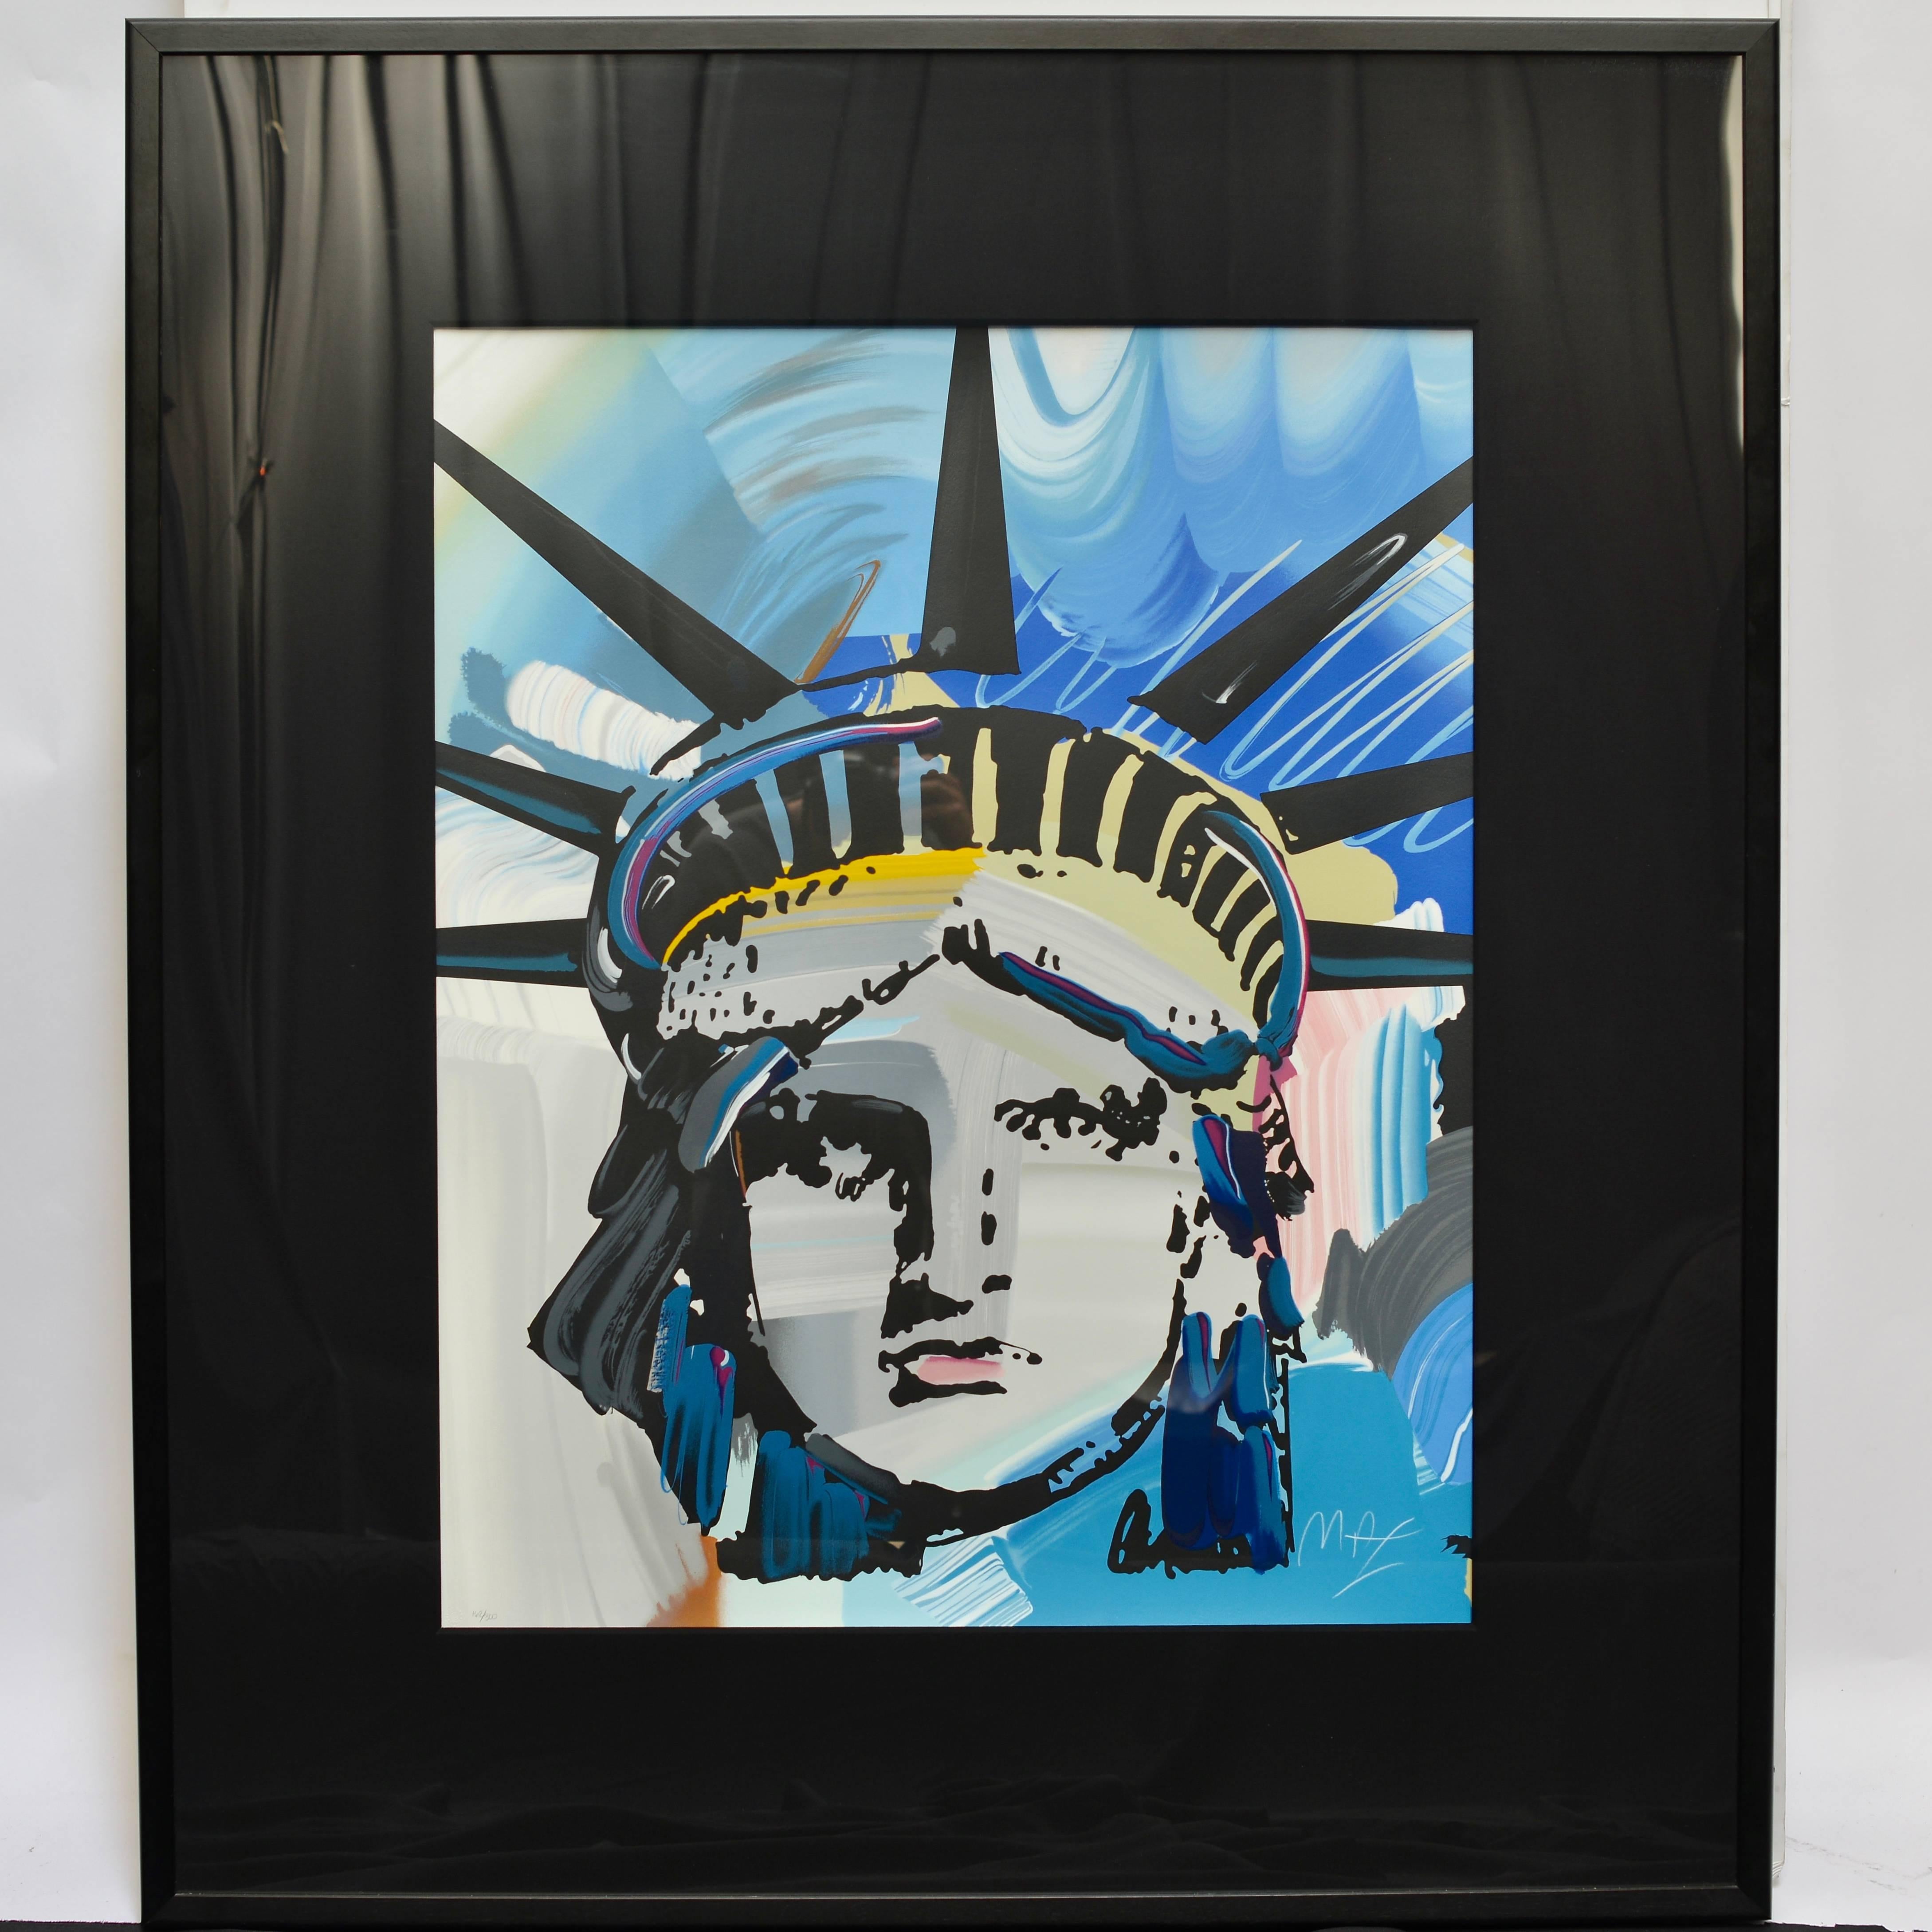 This is the largest of the Peter Max Liberty series. This professionally framed piece is from a large private collection in Beverly Hills California.
Signed in colored pencil, numbered and stamped with the Peter Max studio seal.